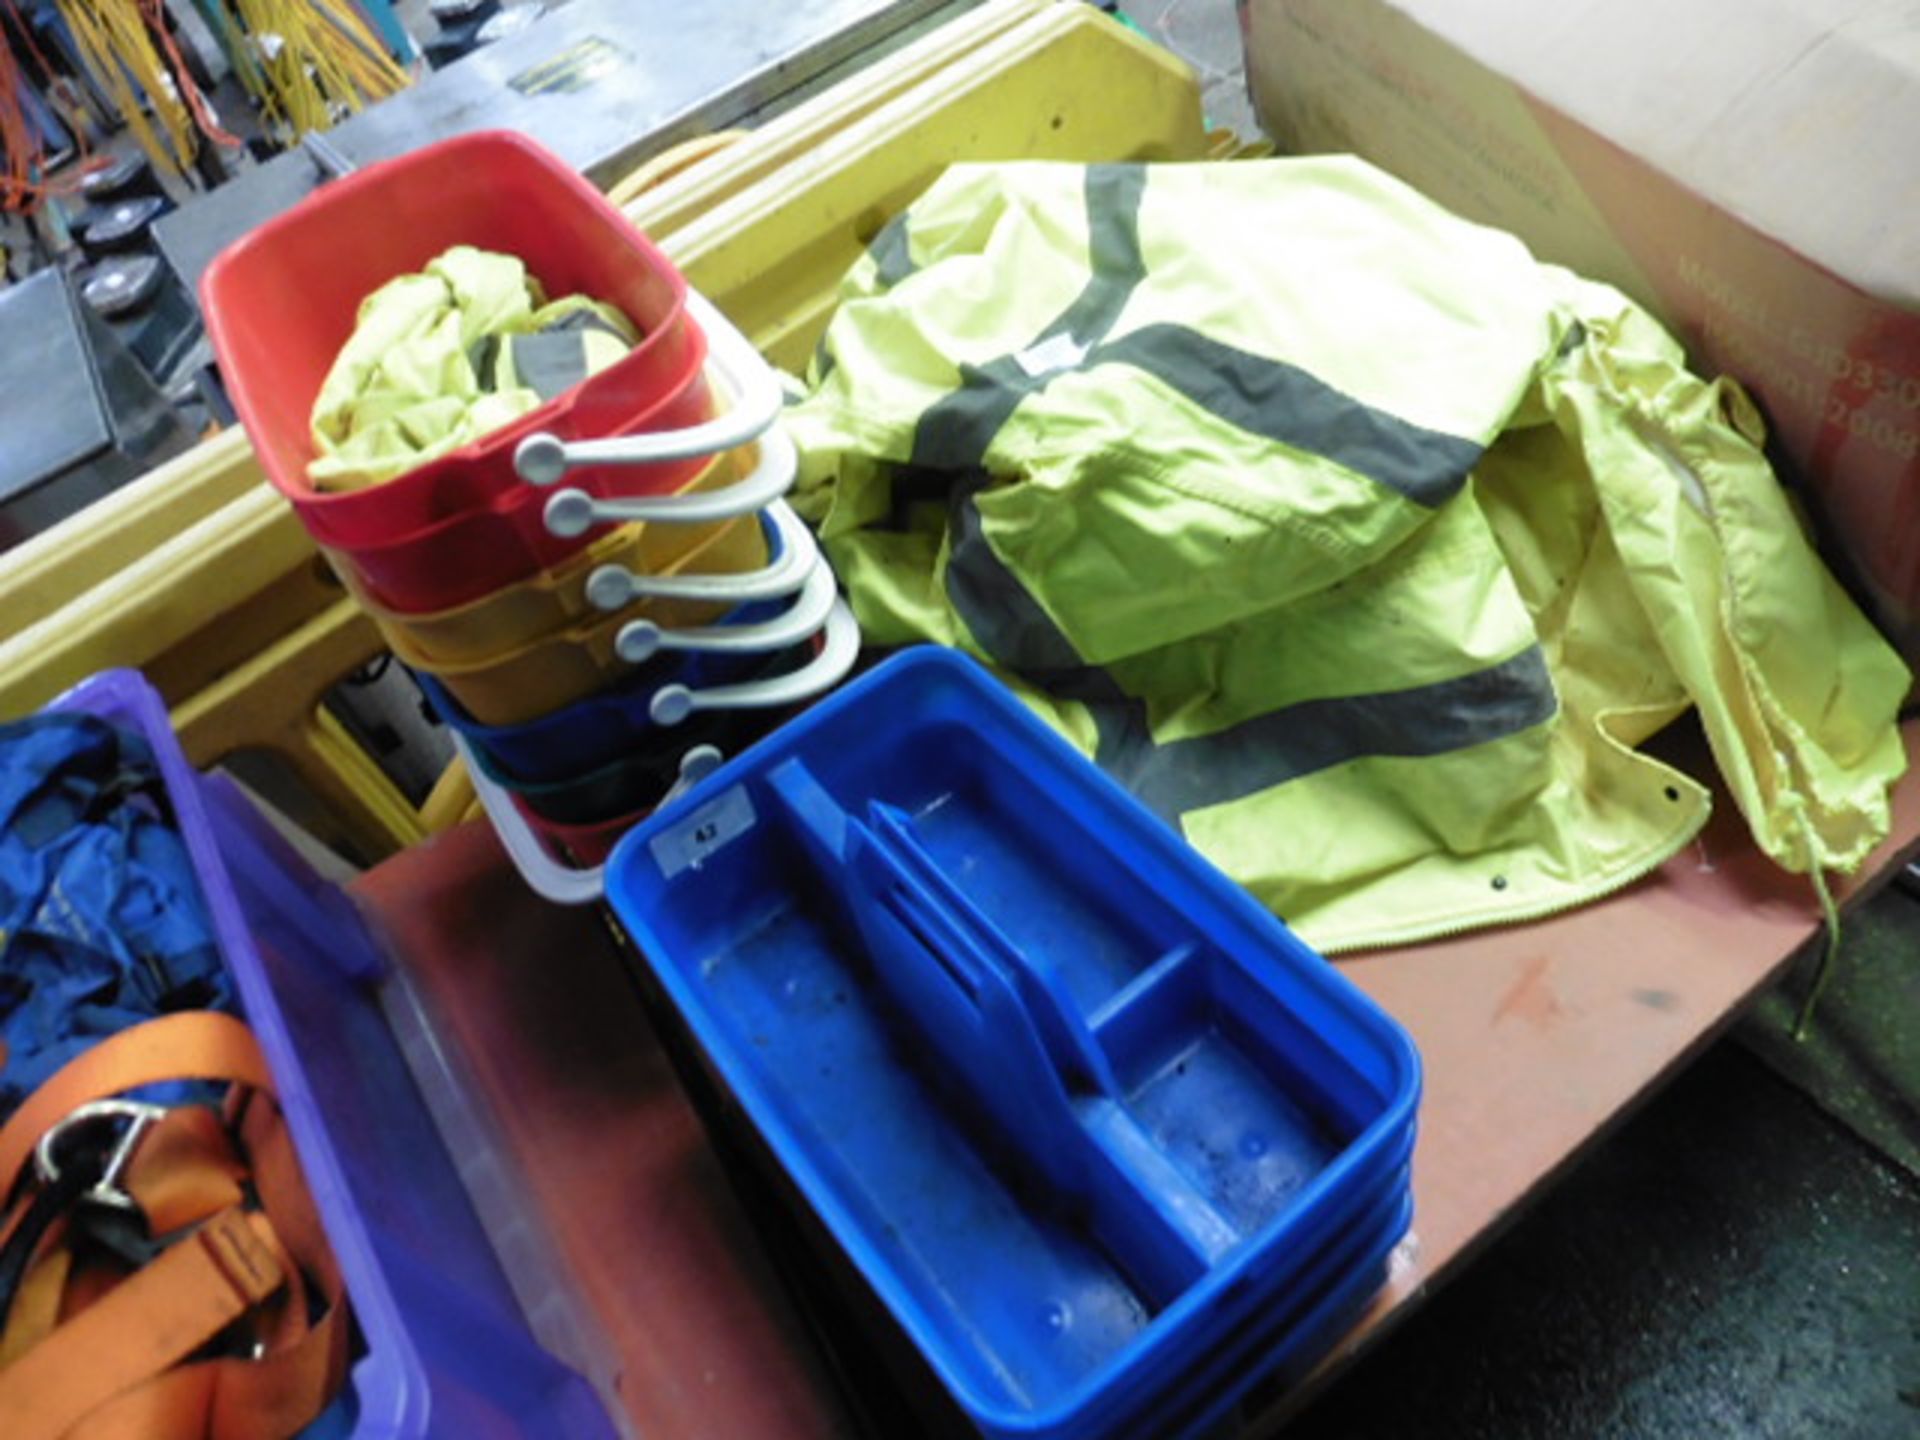 Quantity of cleaners buckets and trays